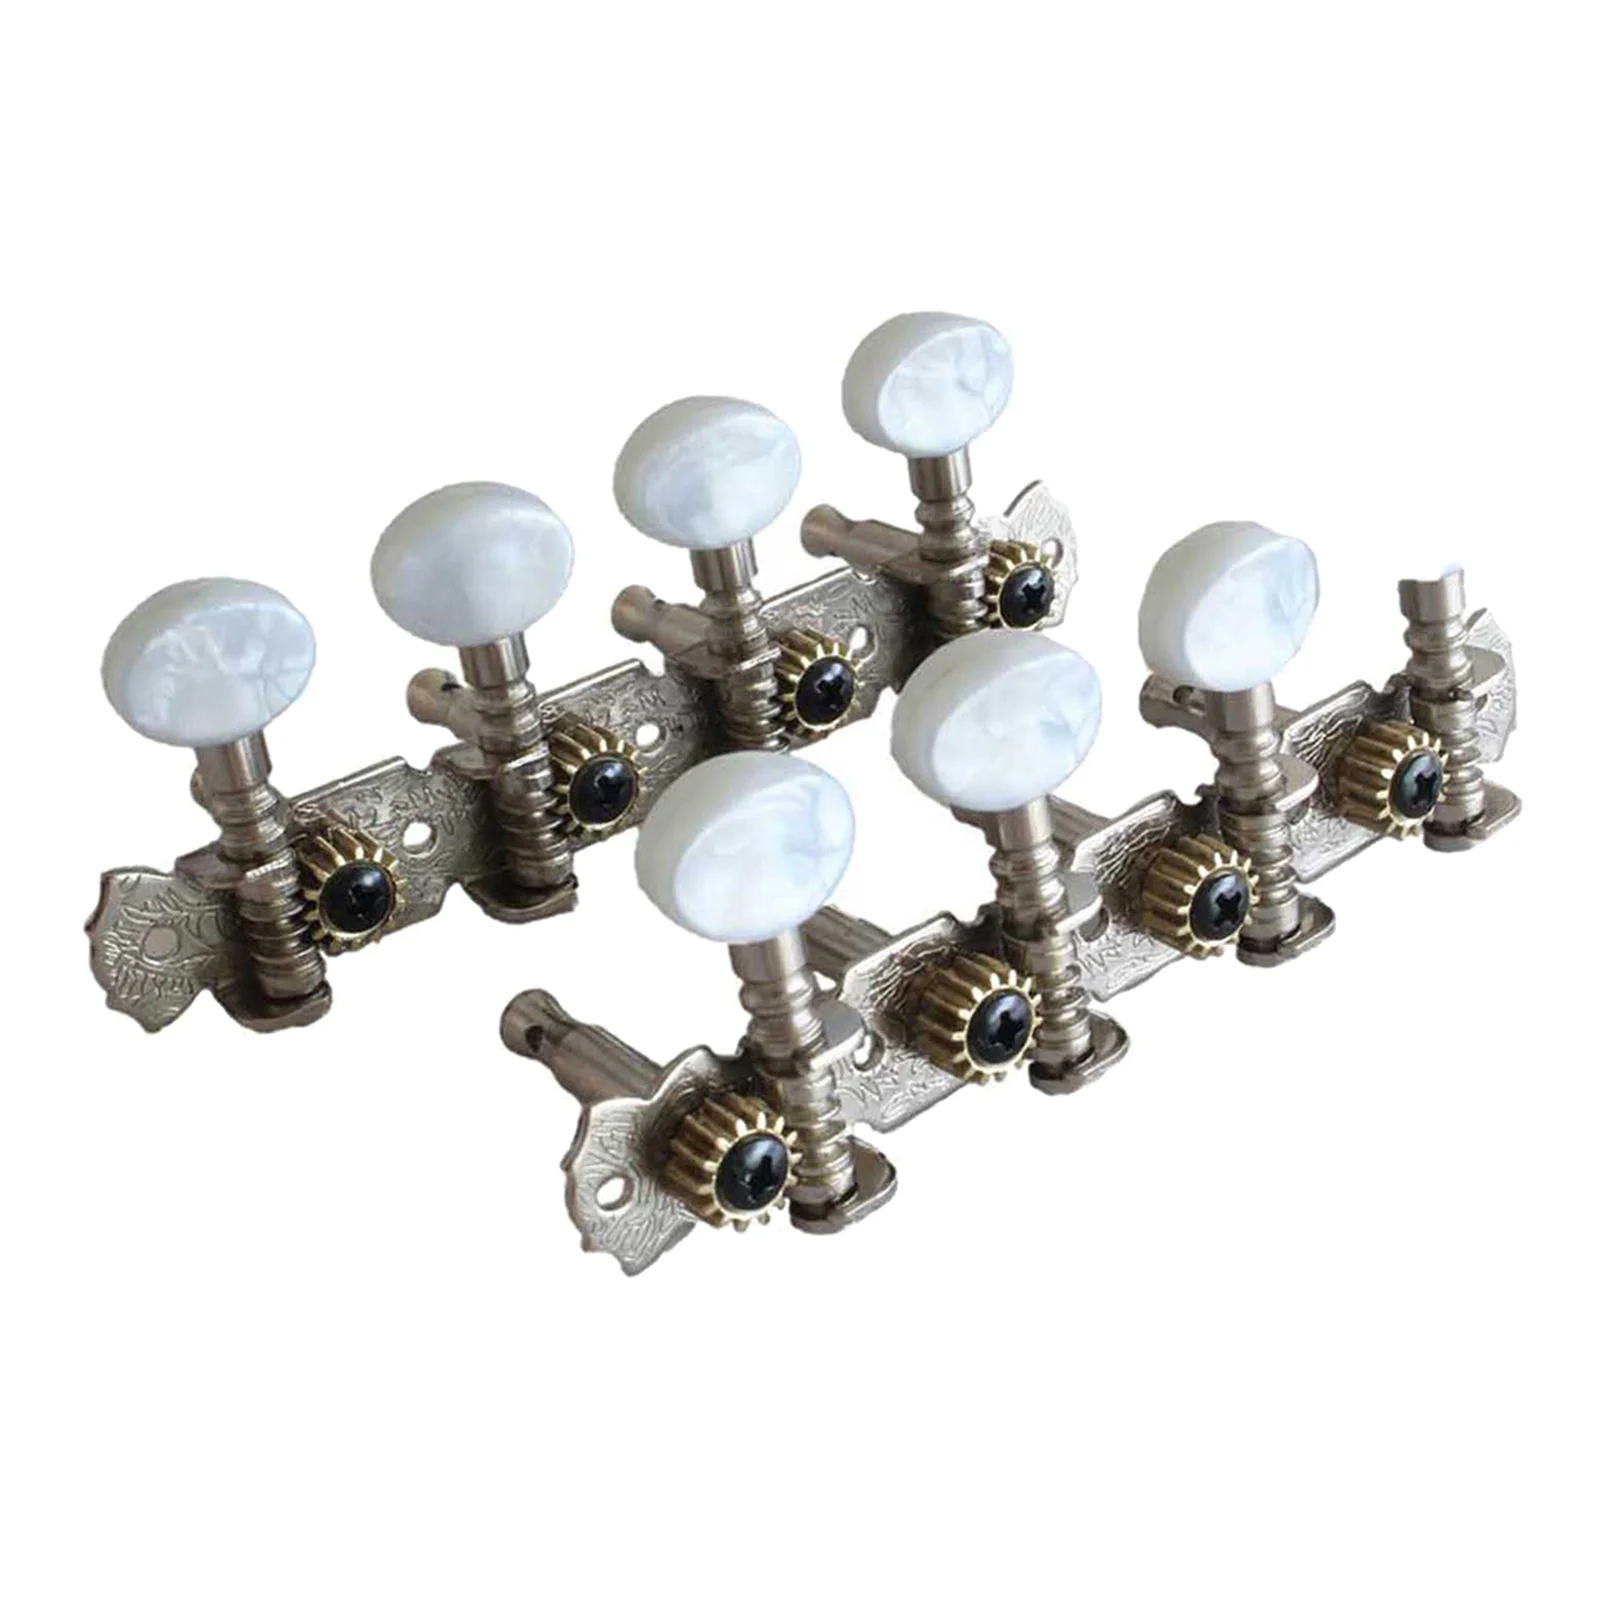 A Set of 4R4L Chrome Mandolin Tuning Pegs Tuners Machine Heads String Tuners Mandolin Accessories